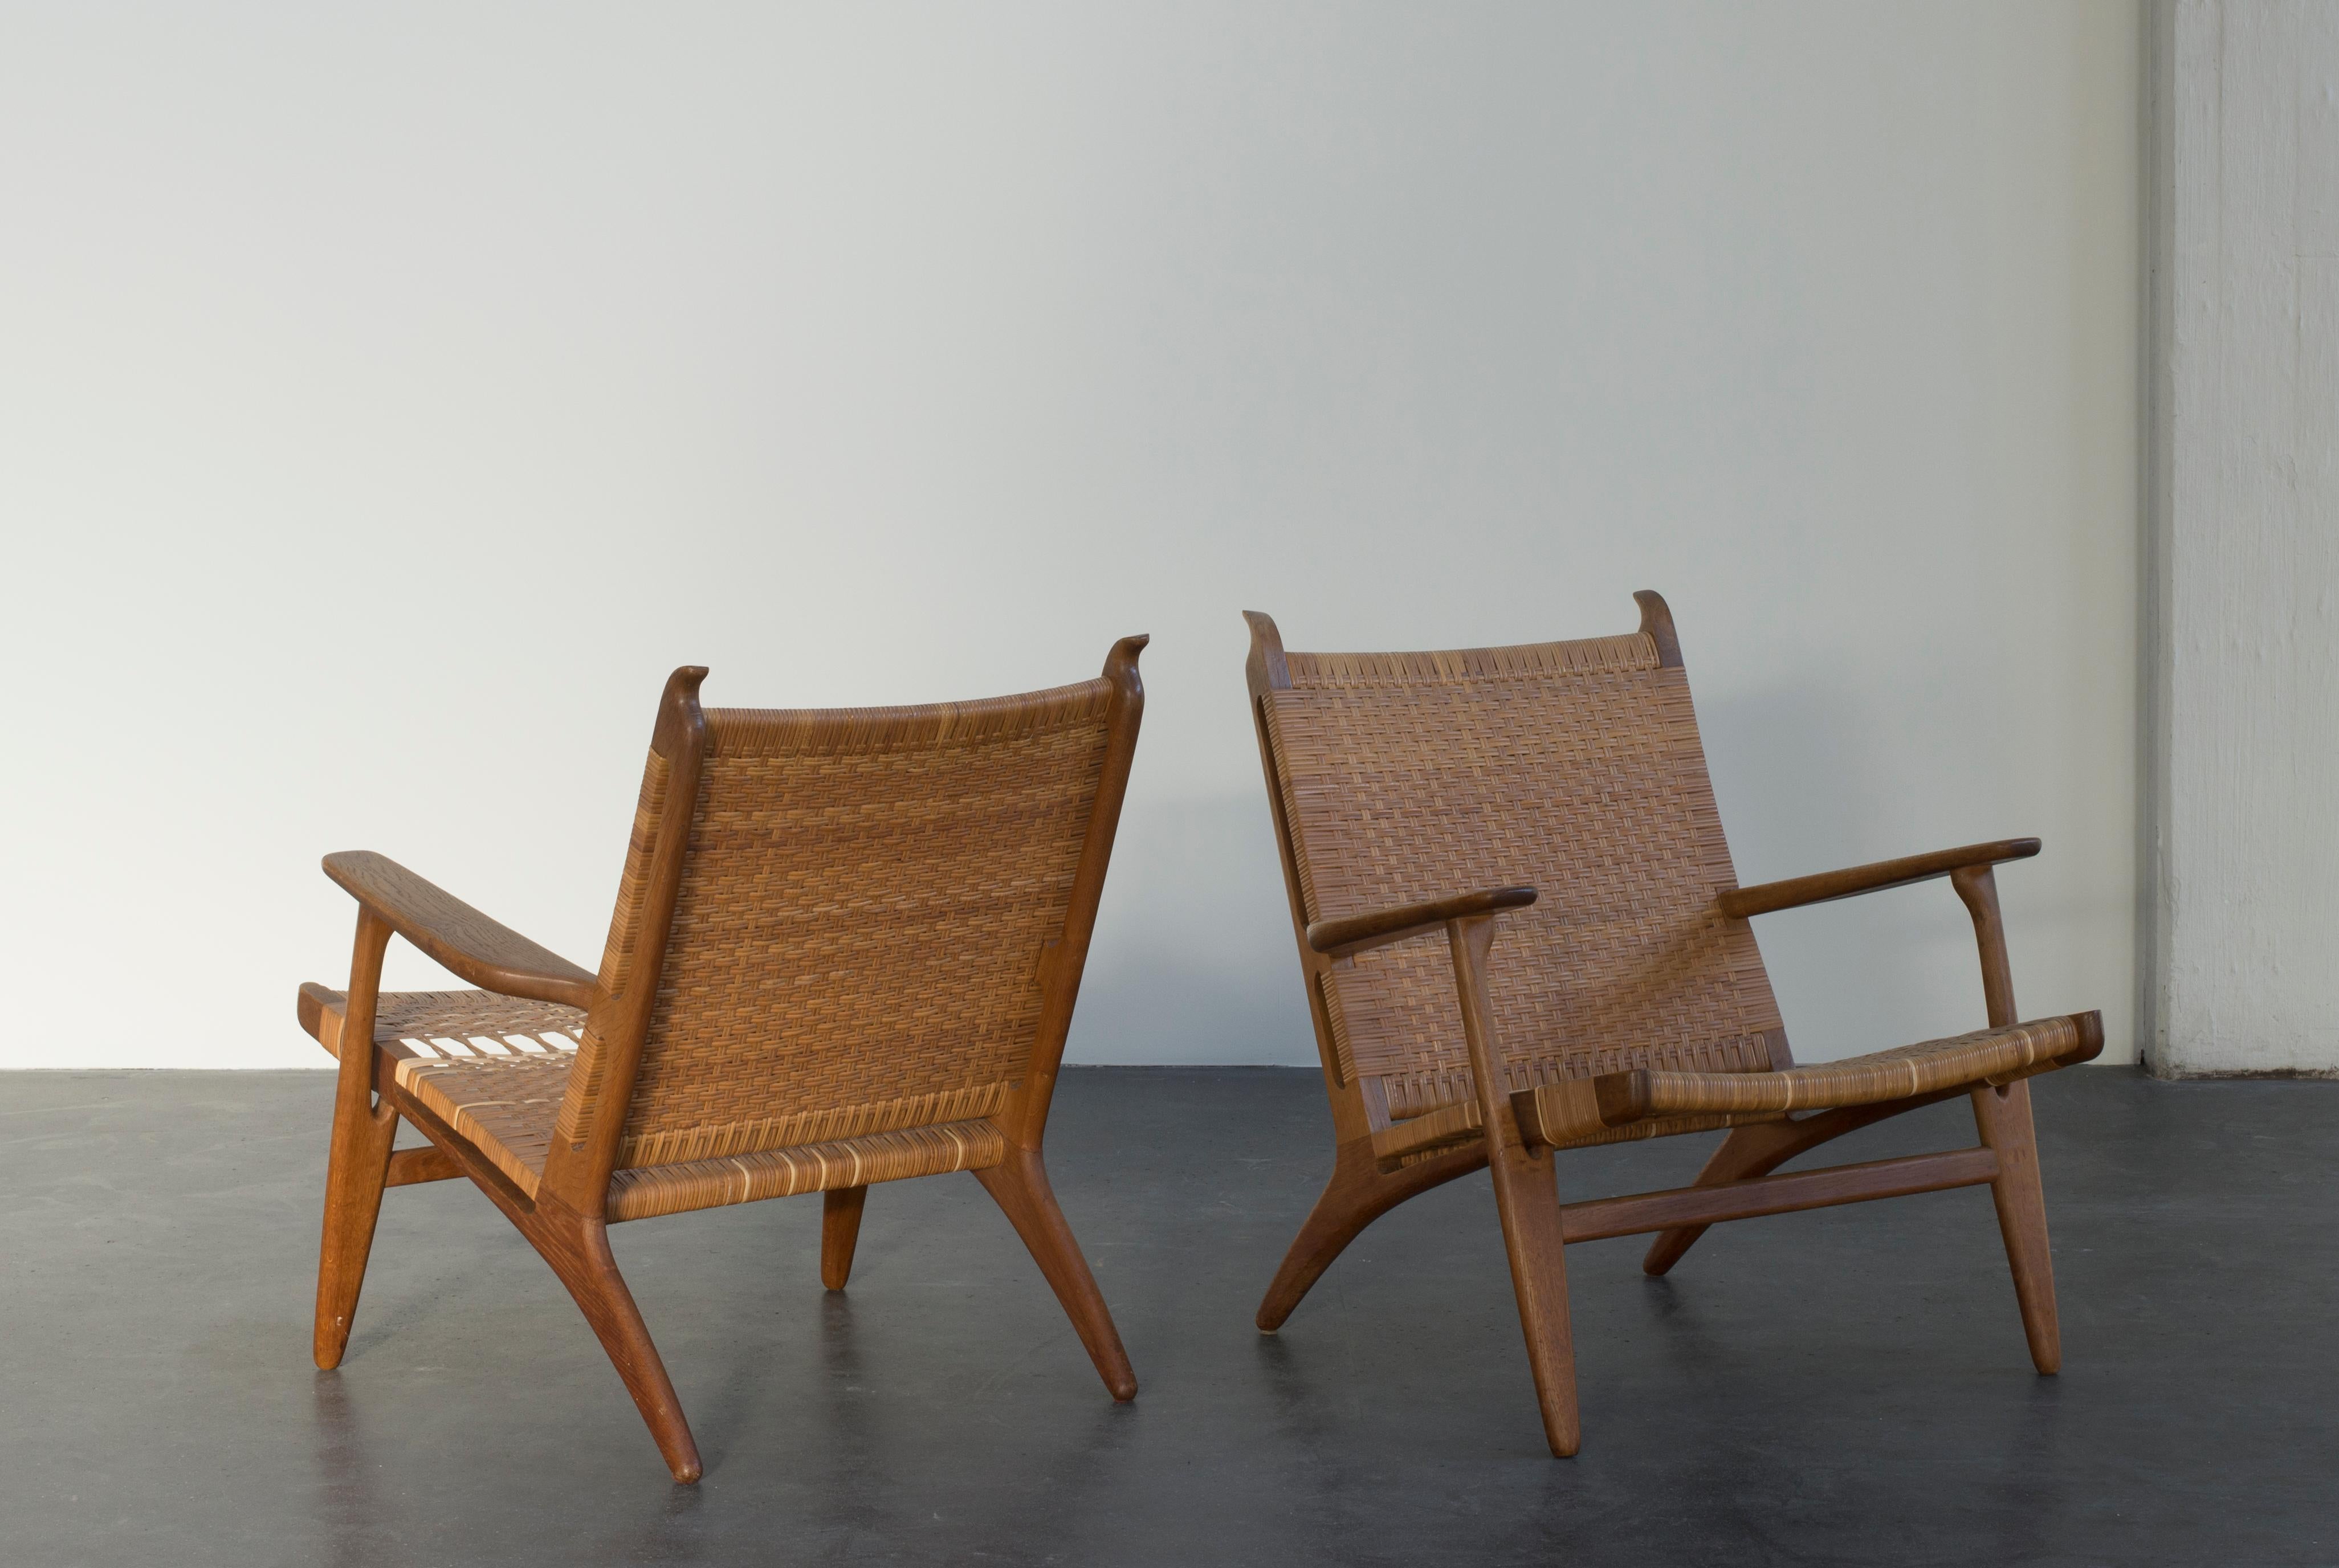 Hans J. Wegner pair of easy chairs with oak frames. Seat and back with woven cane. Executed by Carl Hansen & Søn.